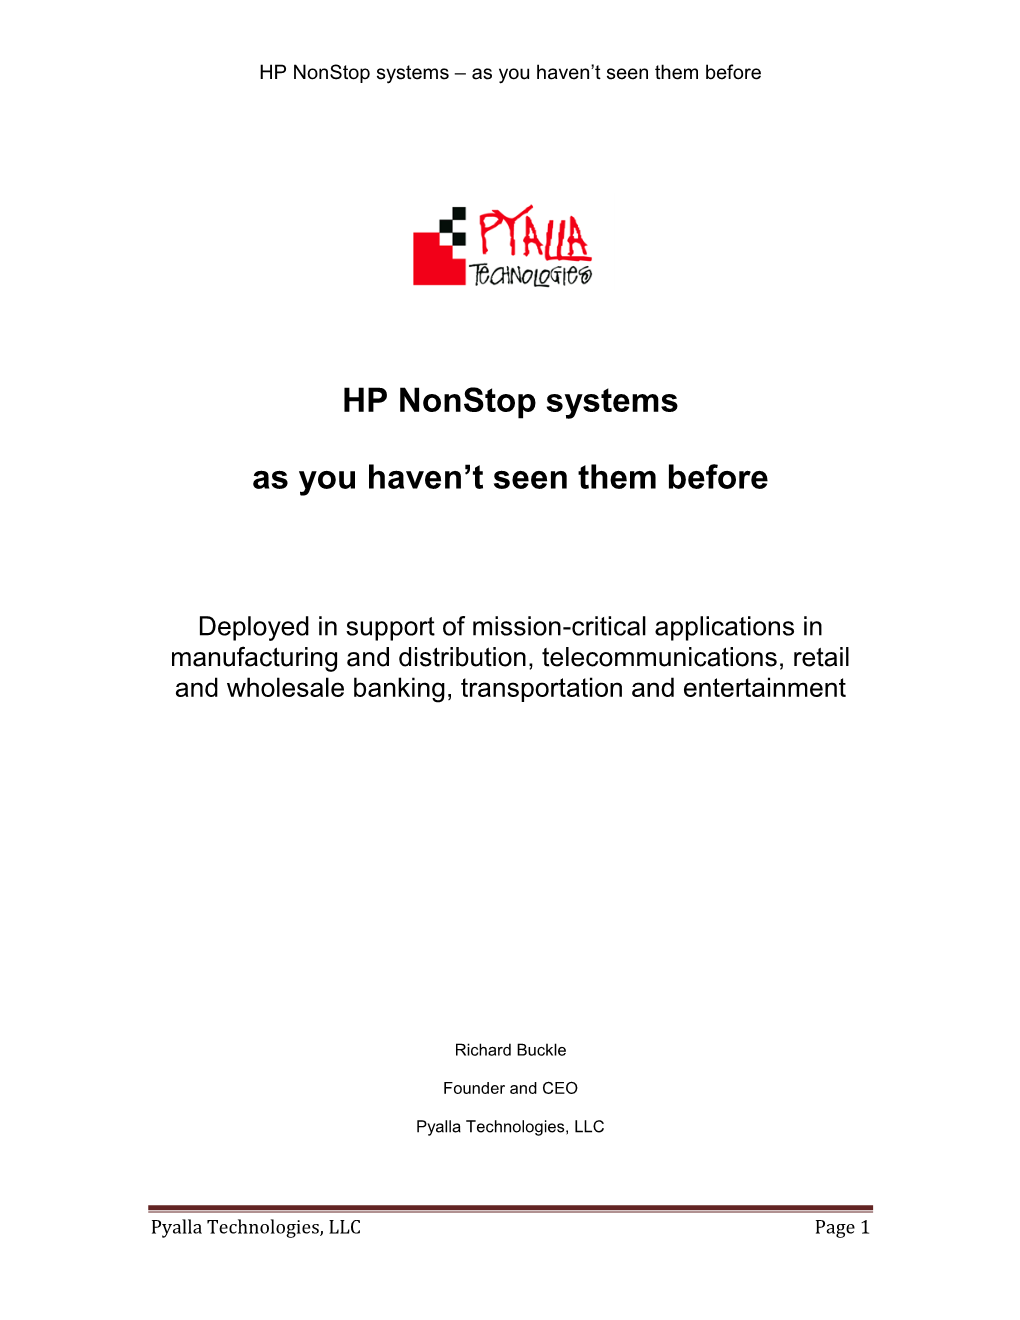 HP Nonstop Systems Deployments